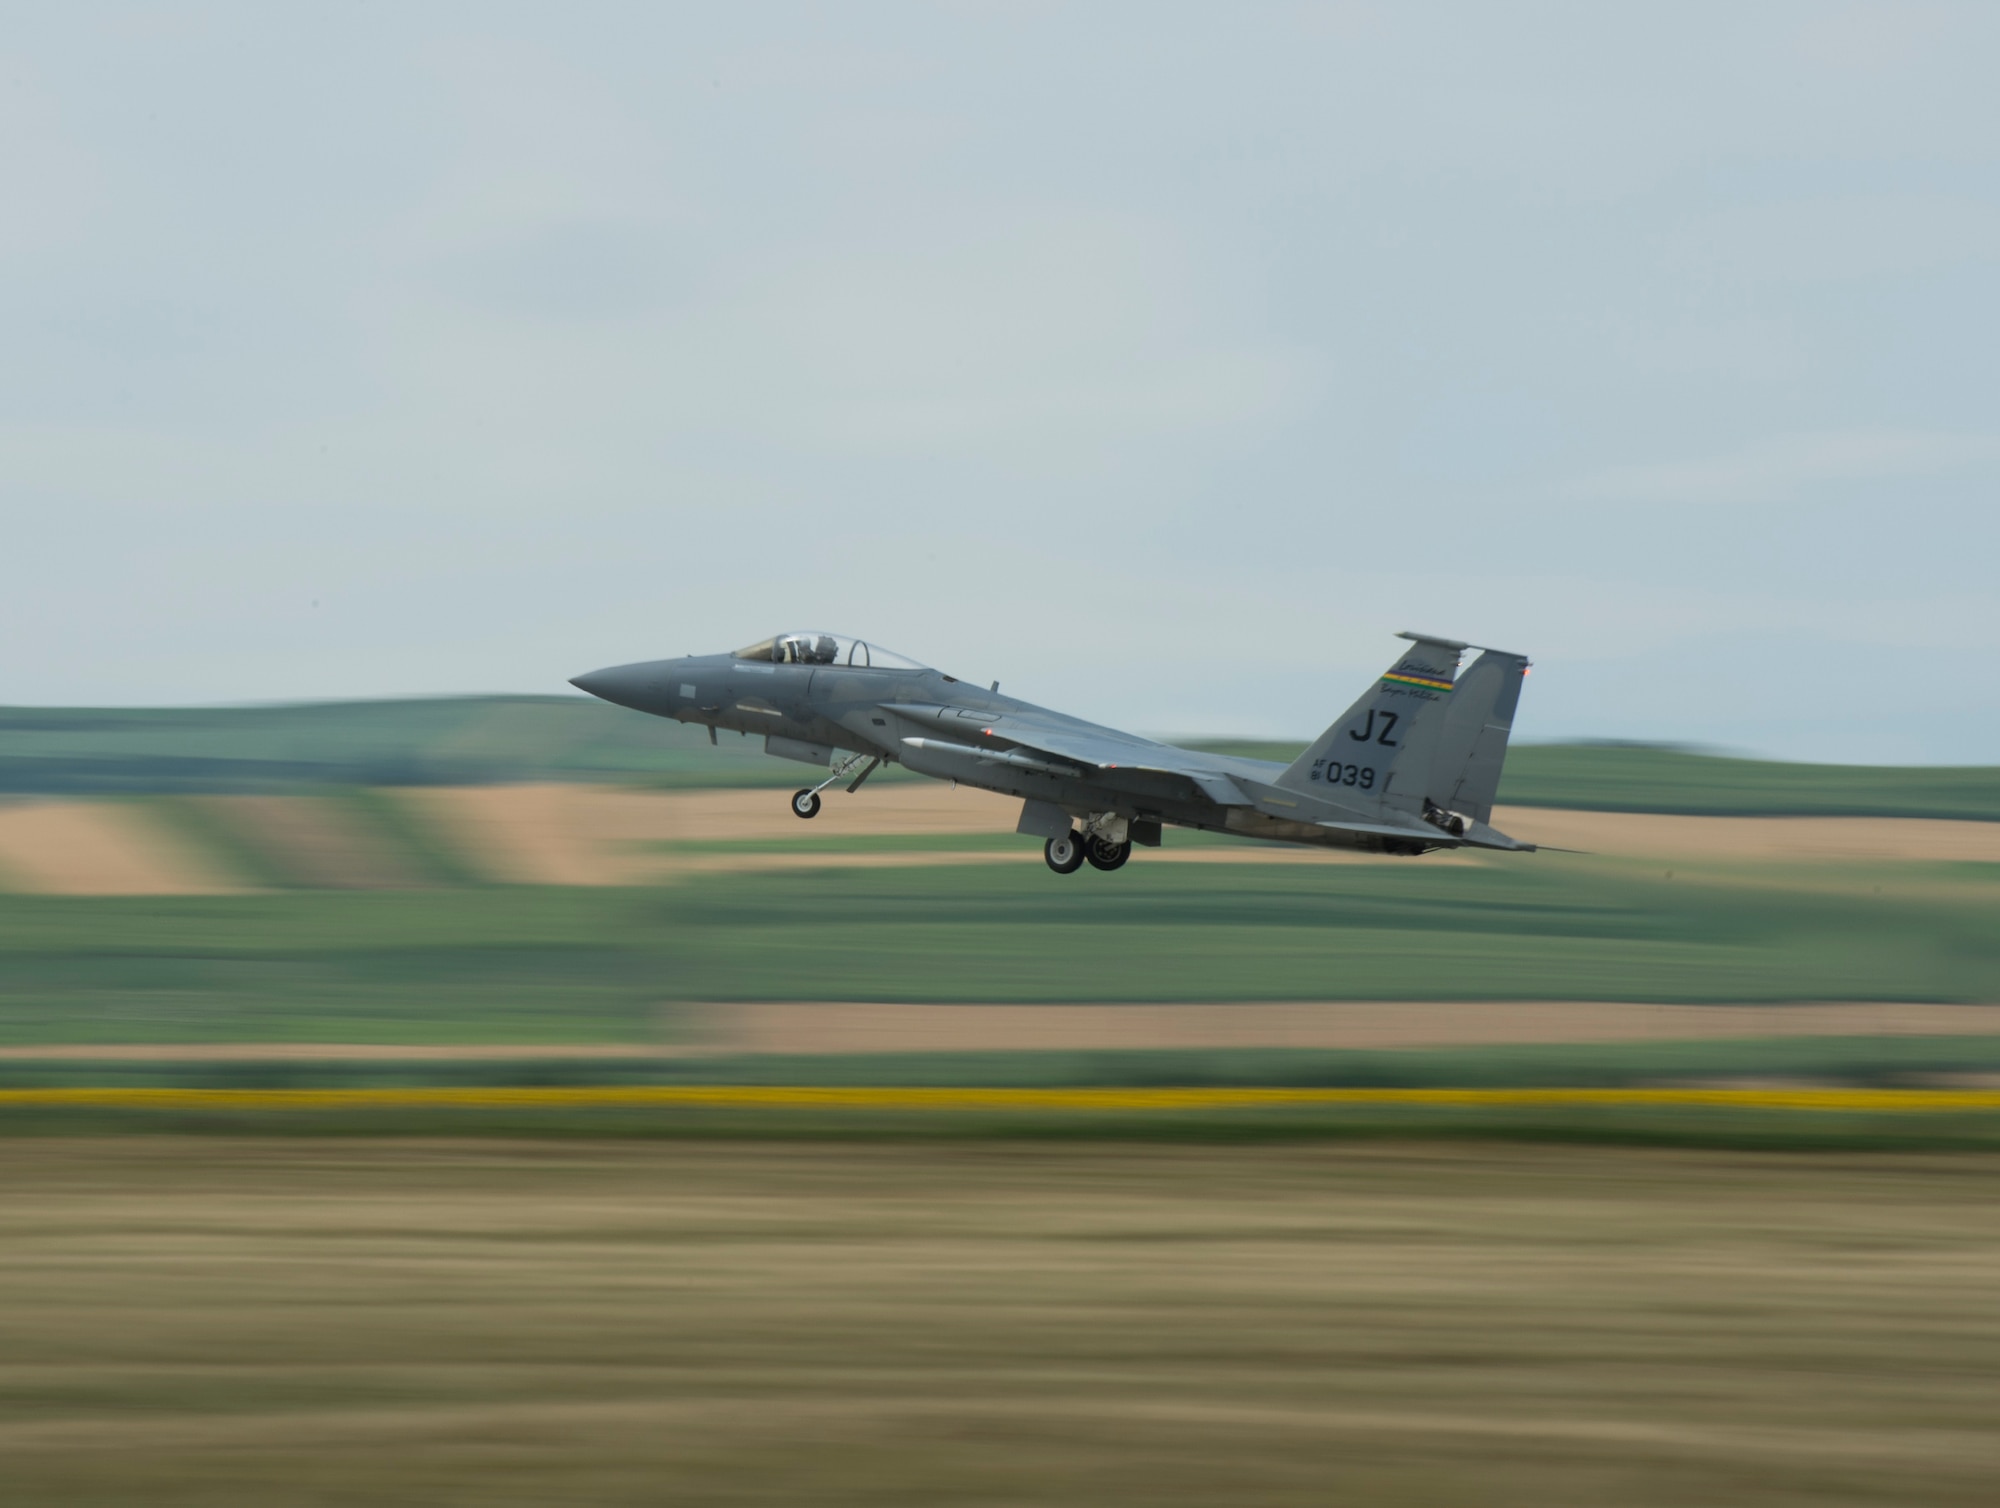 An F-15C Eagle fighter aircraft from the 159th Expeditionary Fighter Squadron takes off from Campia Turzii, Romania, July 12, 2017. The squadron is in Romania in support of Operation Atlantic Resolve, an ongoing operation meant to enhance the security of Europe and bolster partnership between NATO allies. (U.S. Air Force photo by Tech. Sgt. Chad Warren)